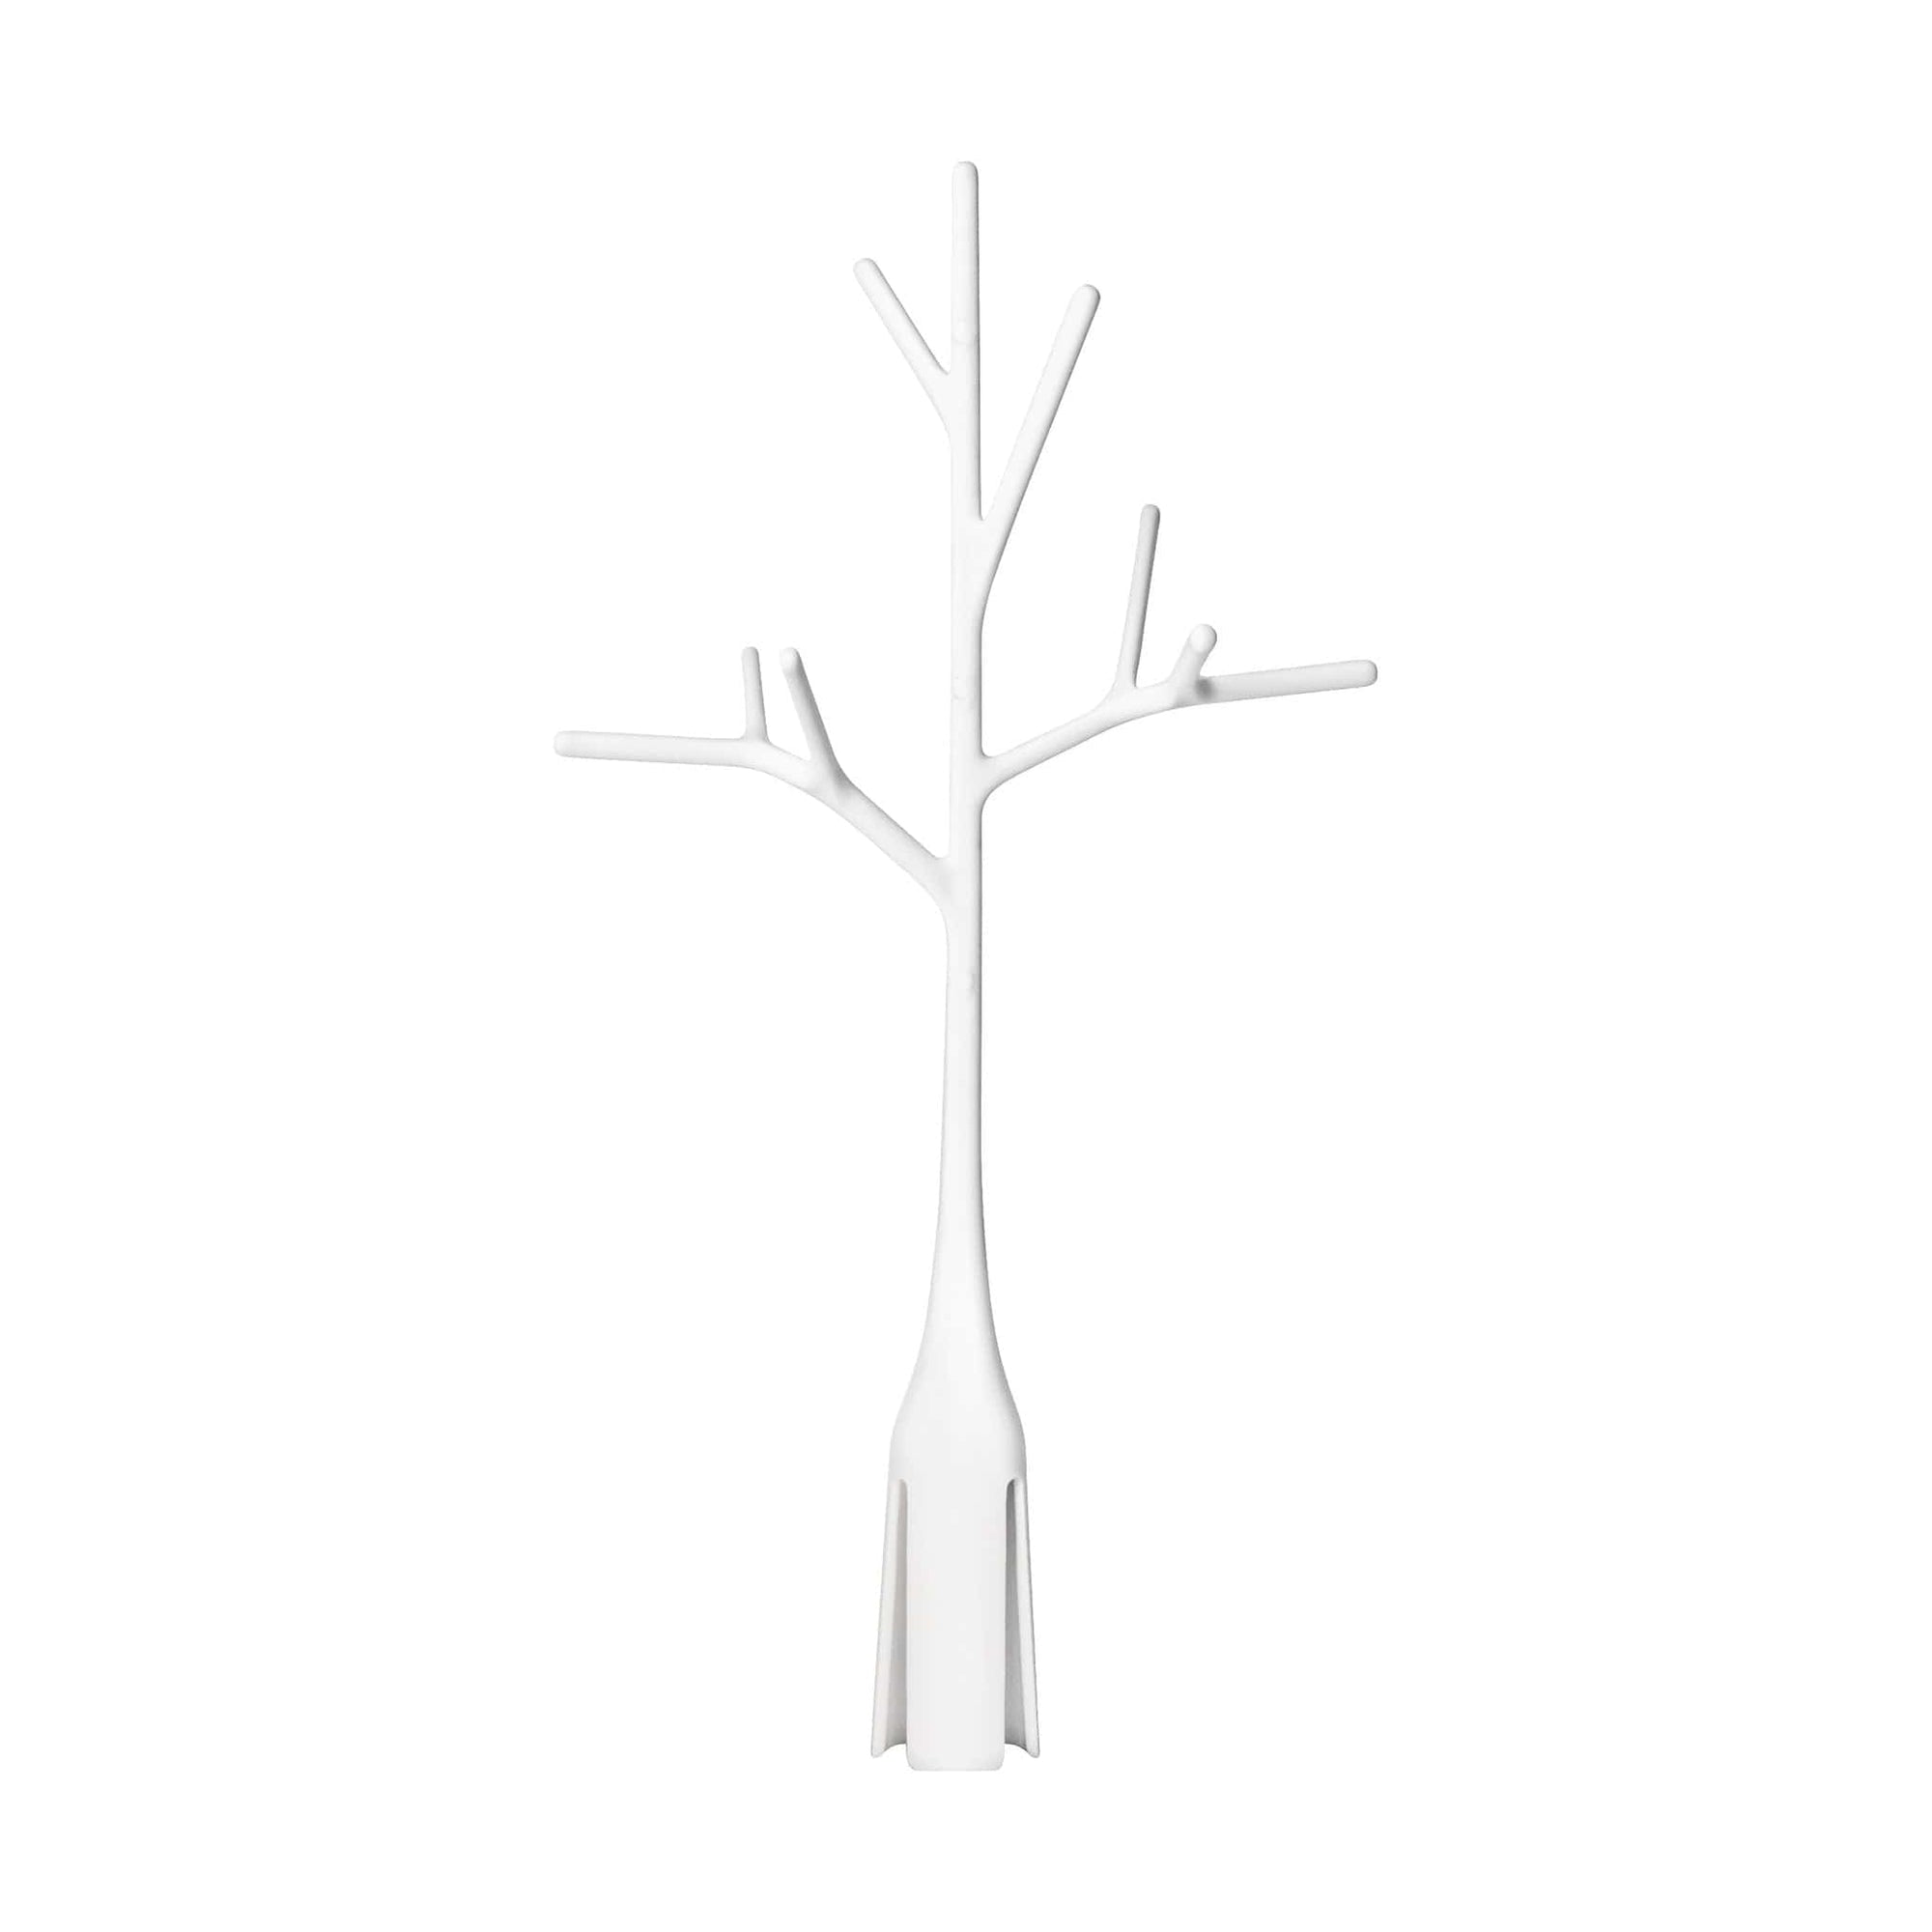 Boon drying rack accessory White Boon TWIG Drying Rack Accessory